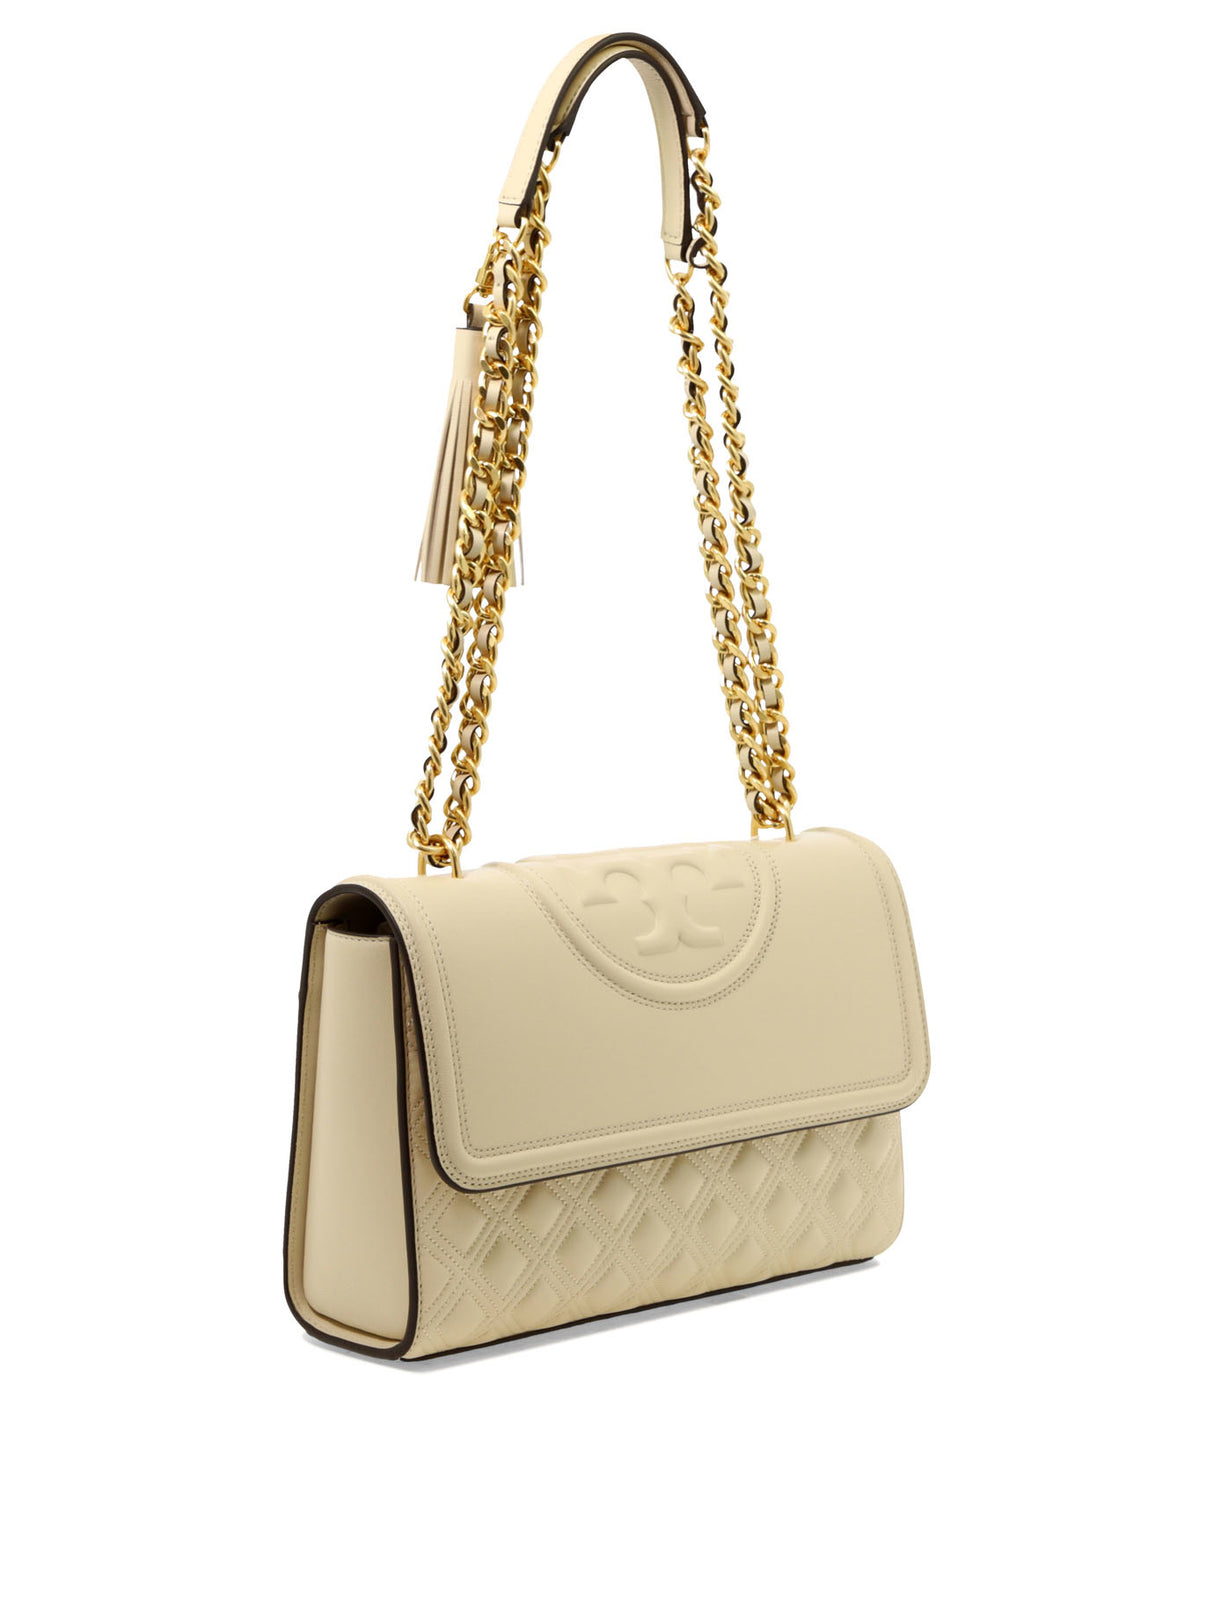 TORY BURCH Beige Leather Shoulder and Crossbody Bag for Women